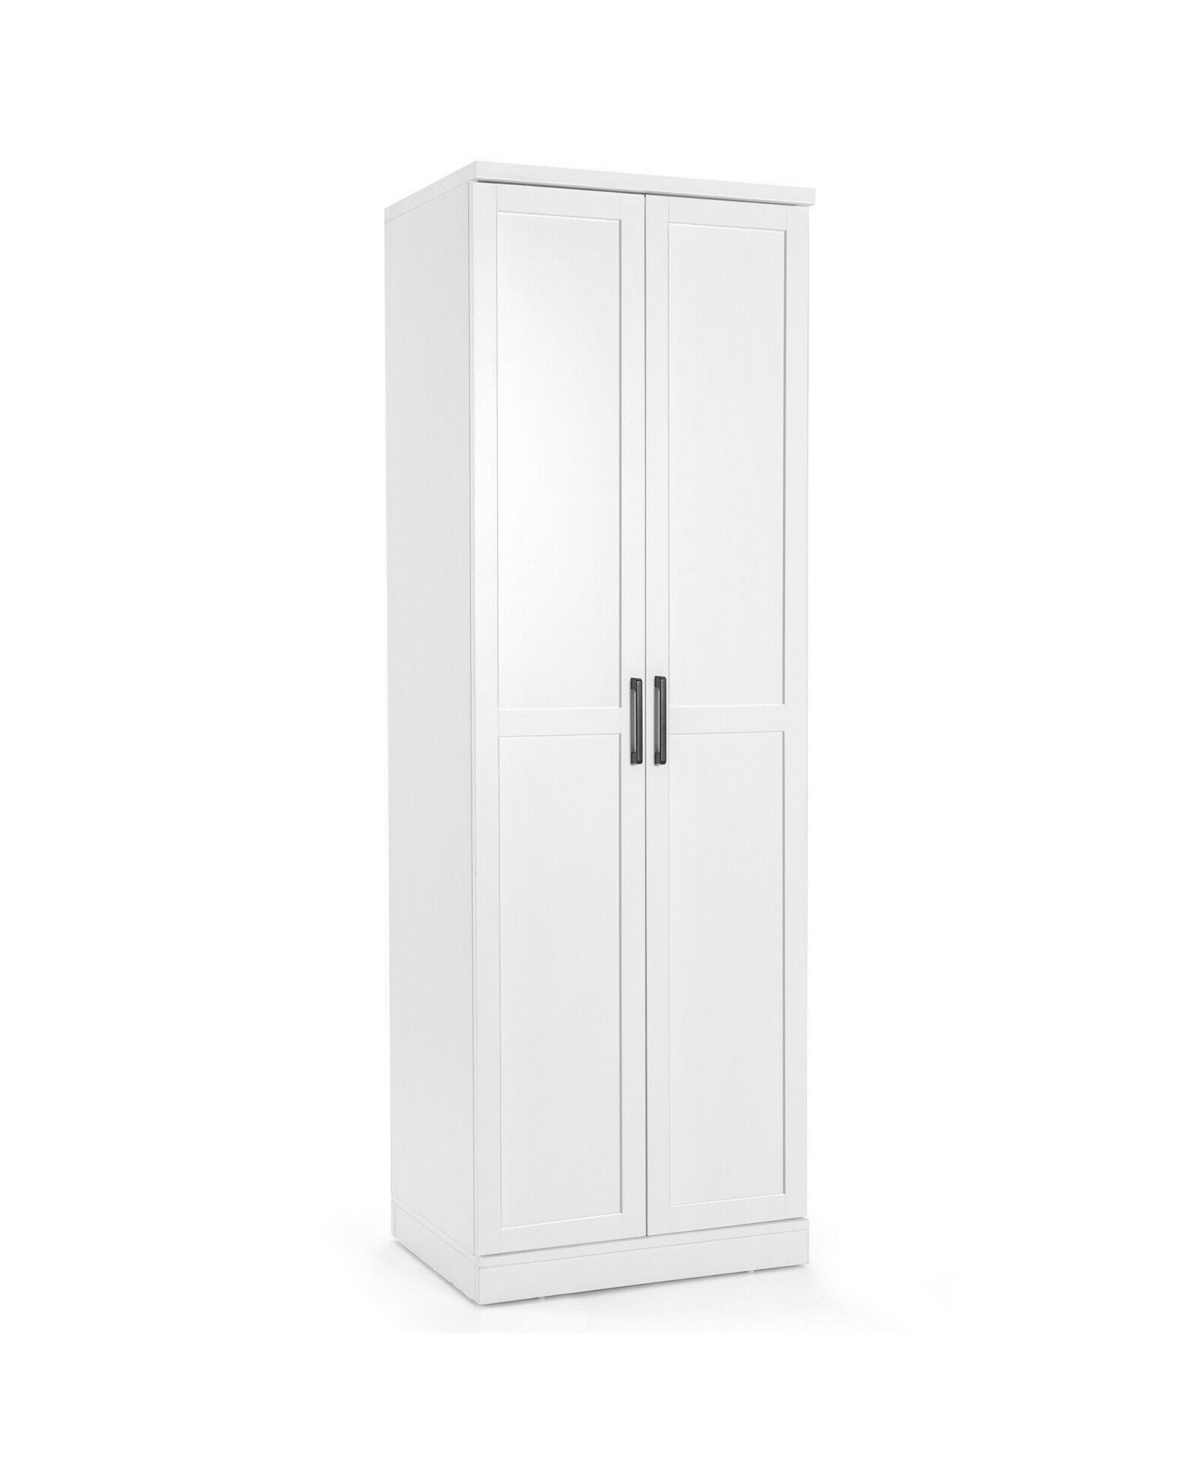 70 Inch Freestanding Storage Cabinet with 2 Doors and 5 Shelves - White